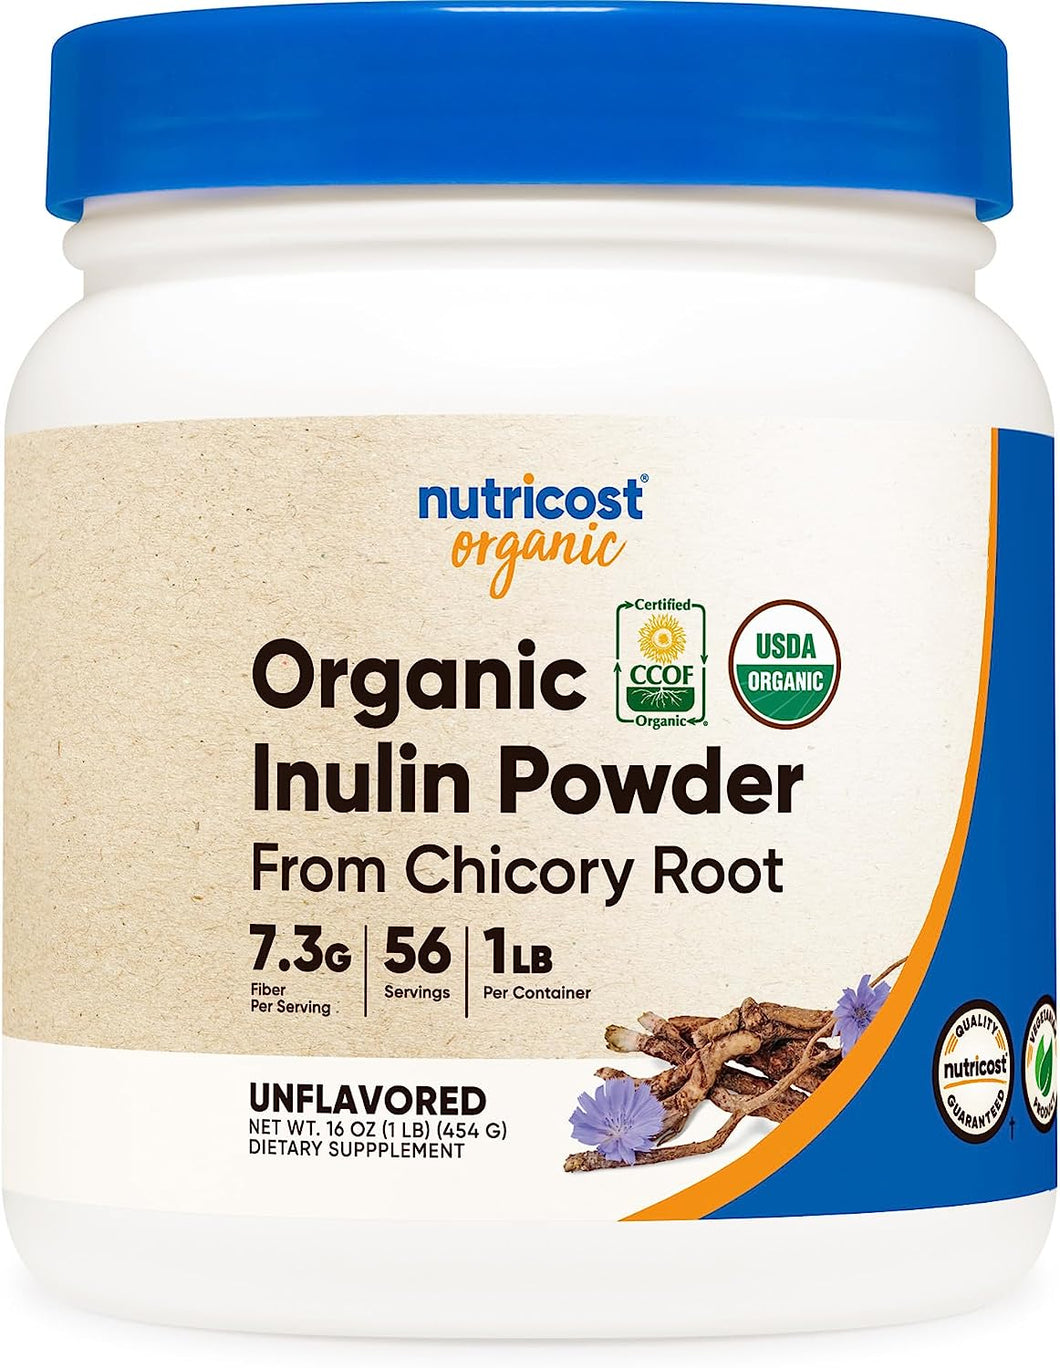 Nutricost Organic Inulin Powder 1LB (454 Grams) 7 Grams of Fiber Per Serving - from Chicory Root - Certified USDA Organic